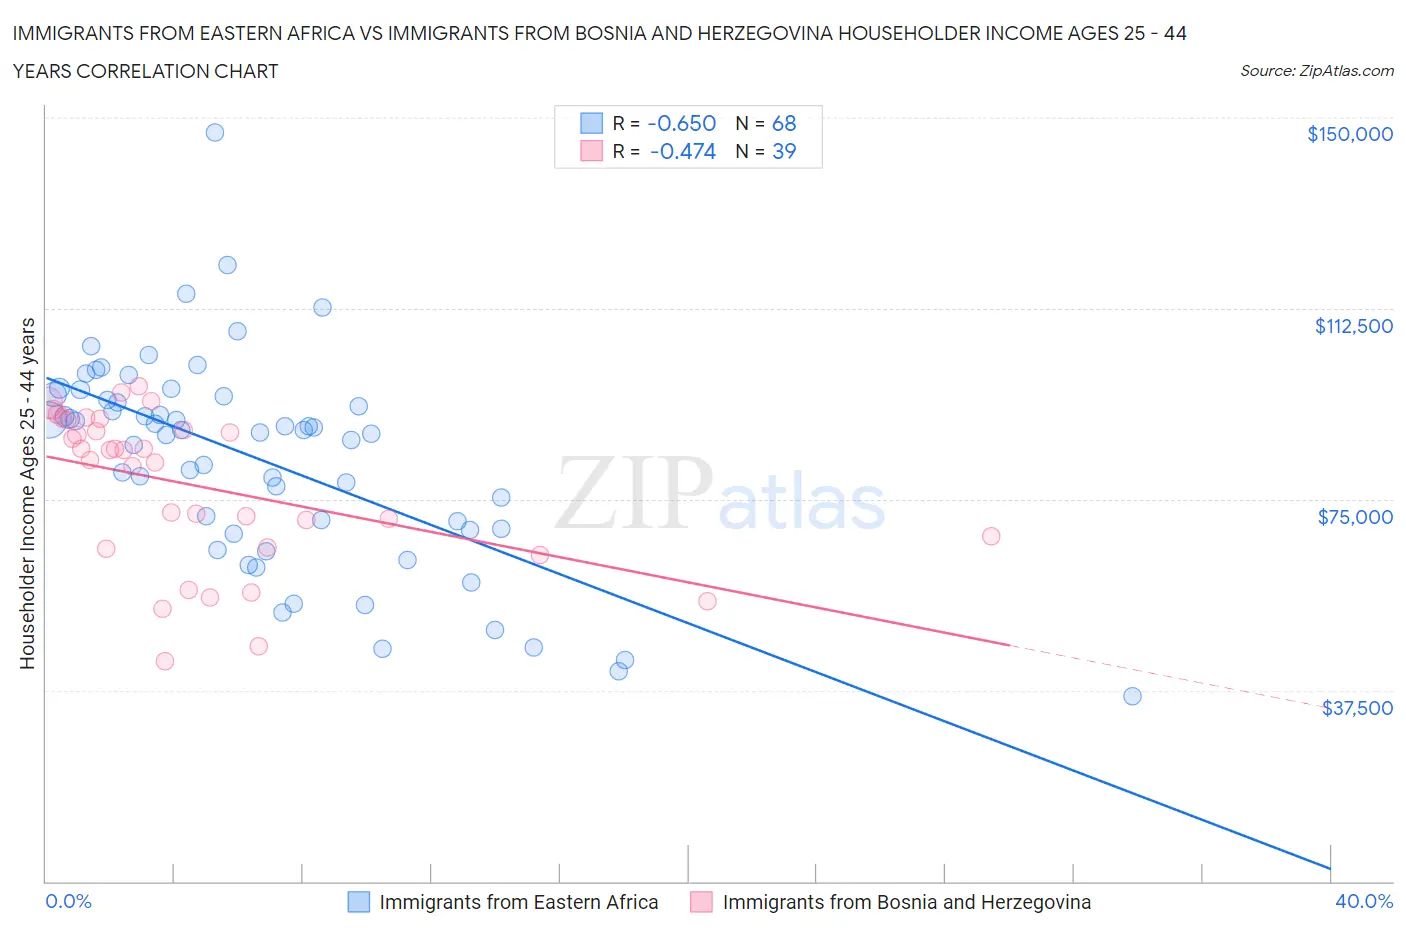 Immigrants from Eastern Africa vs Immigrants from Bosnia and Herzegovina Householder Income Ages 25 - 44 years